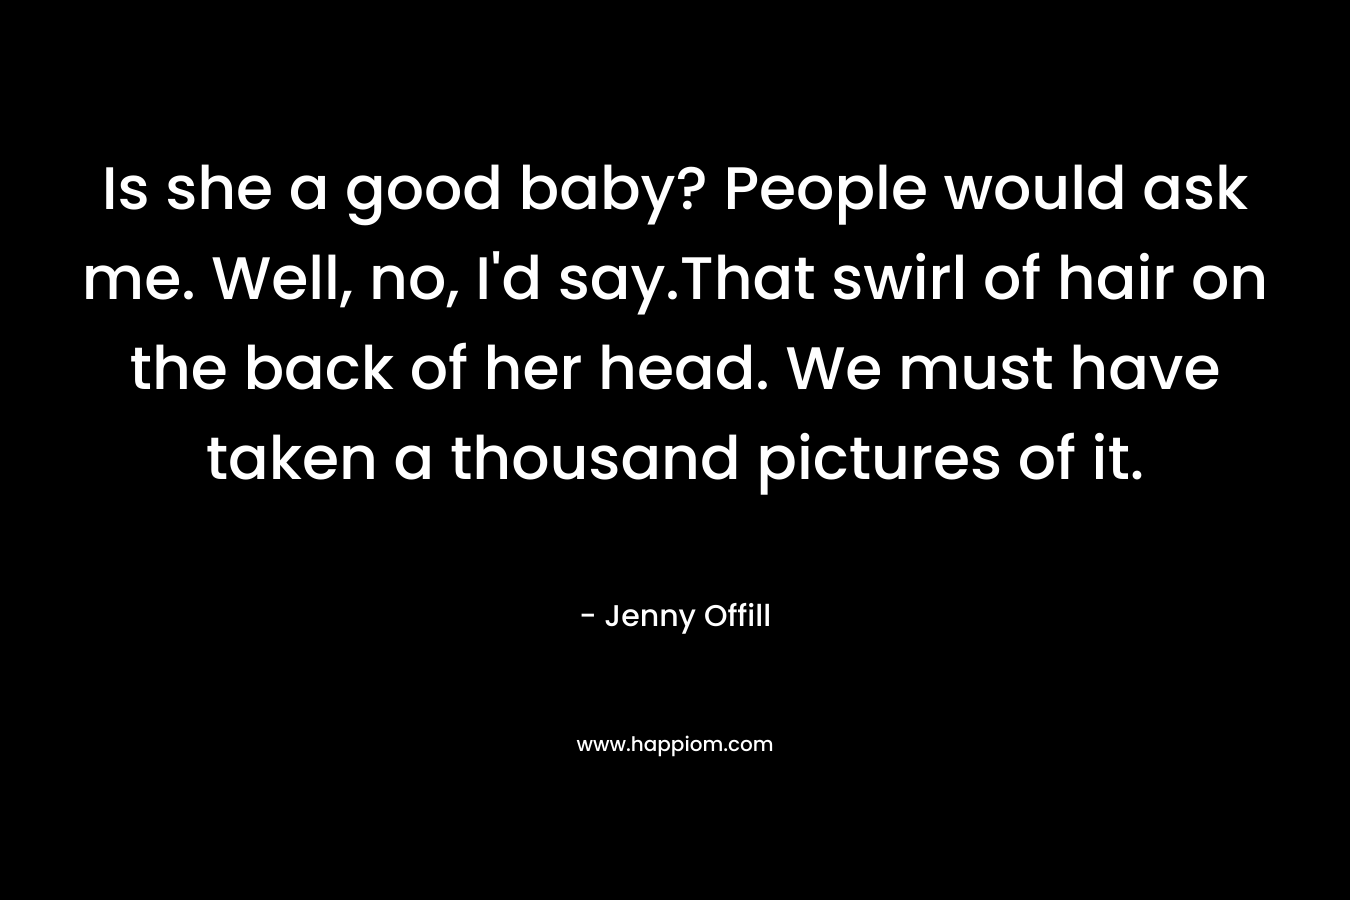 Is she a good baby? People would ask me. Well, no, I’d say.That swirl of hair on the back of her head. We must have taken a thousand pictures of it. – Jenny Offill